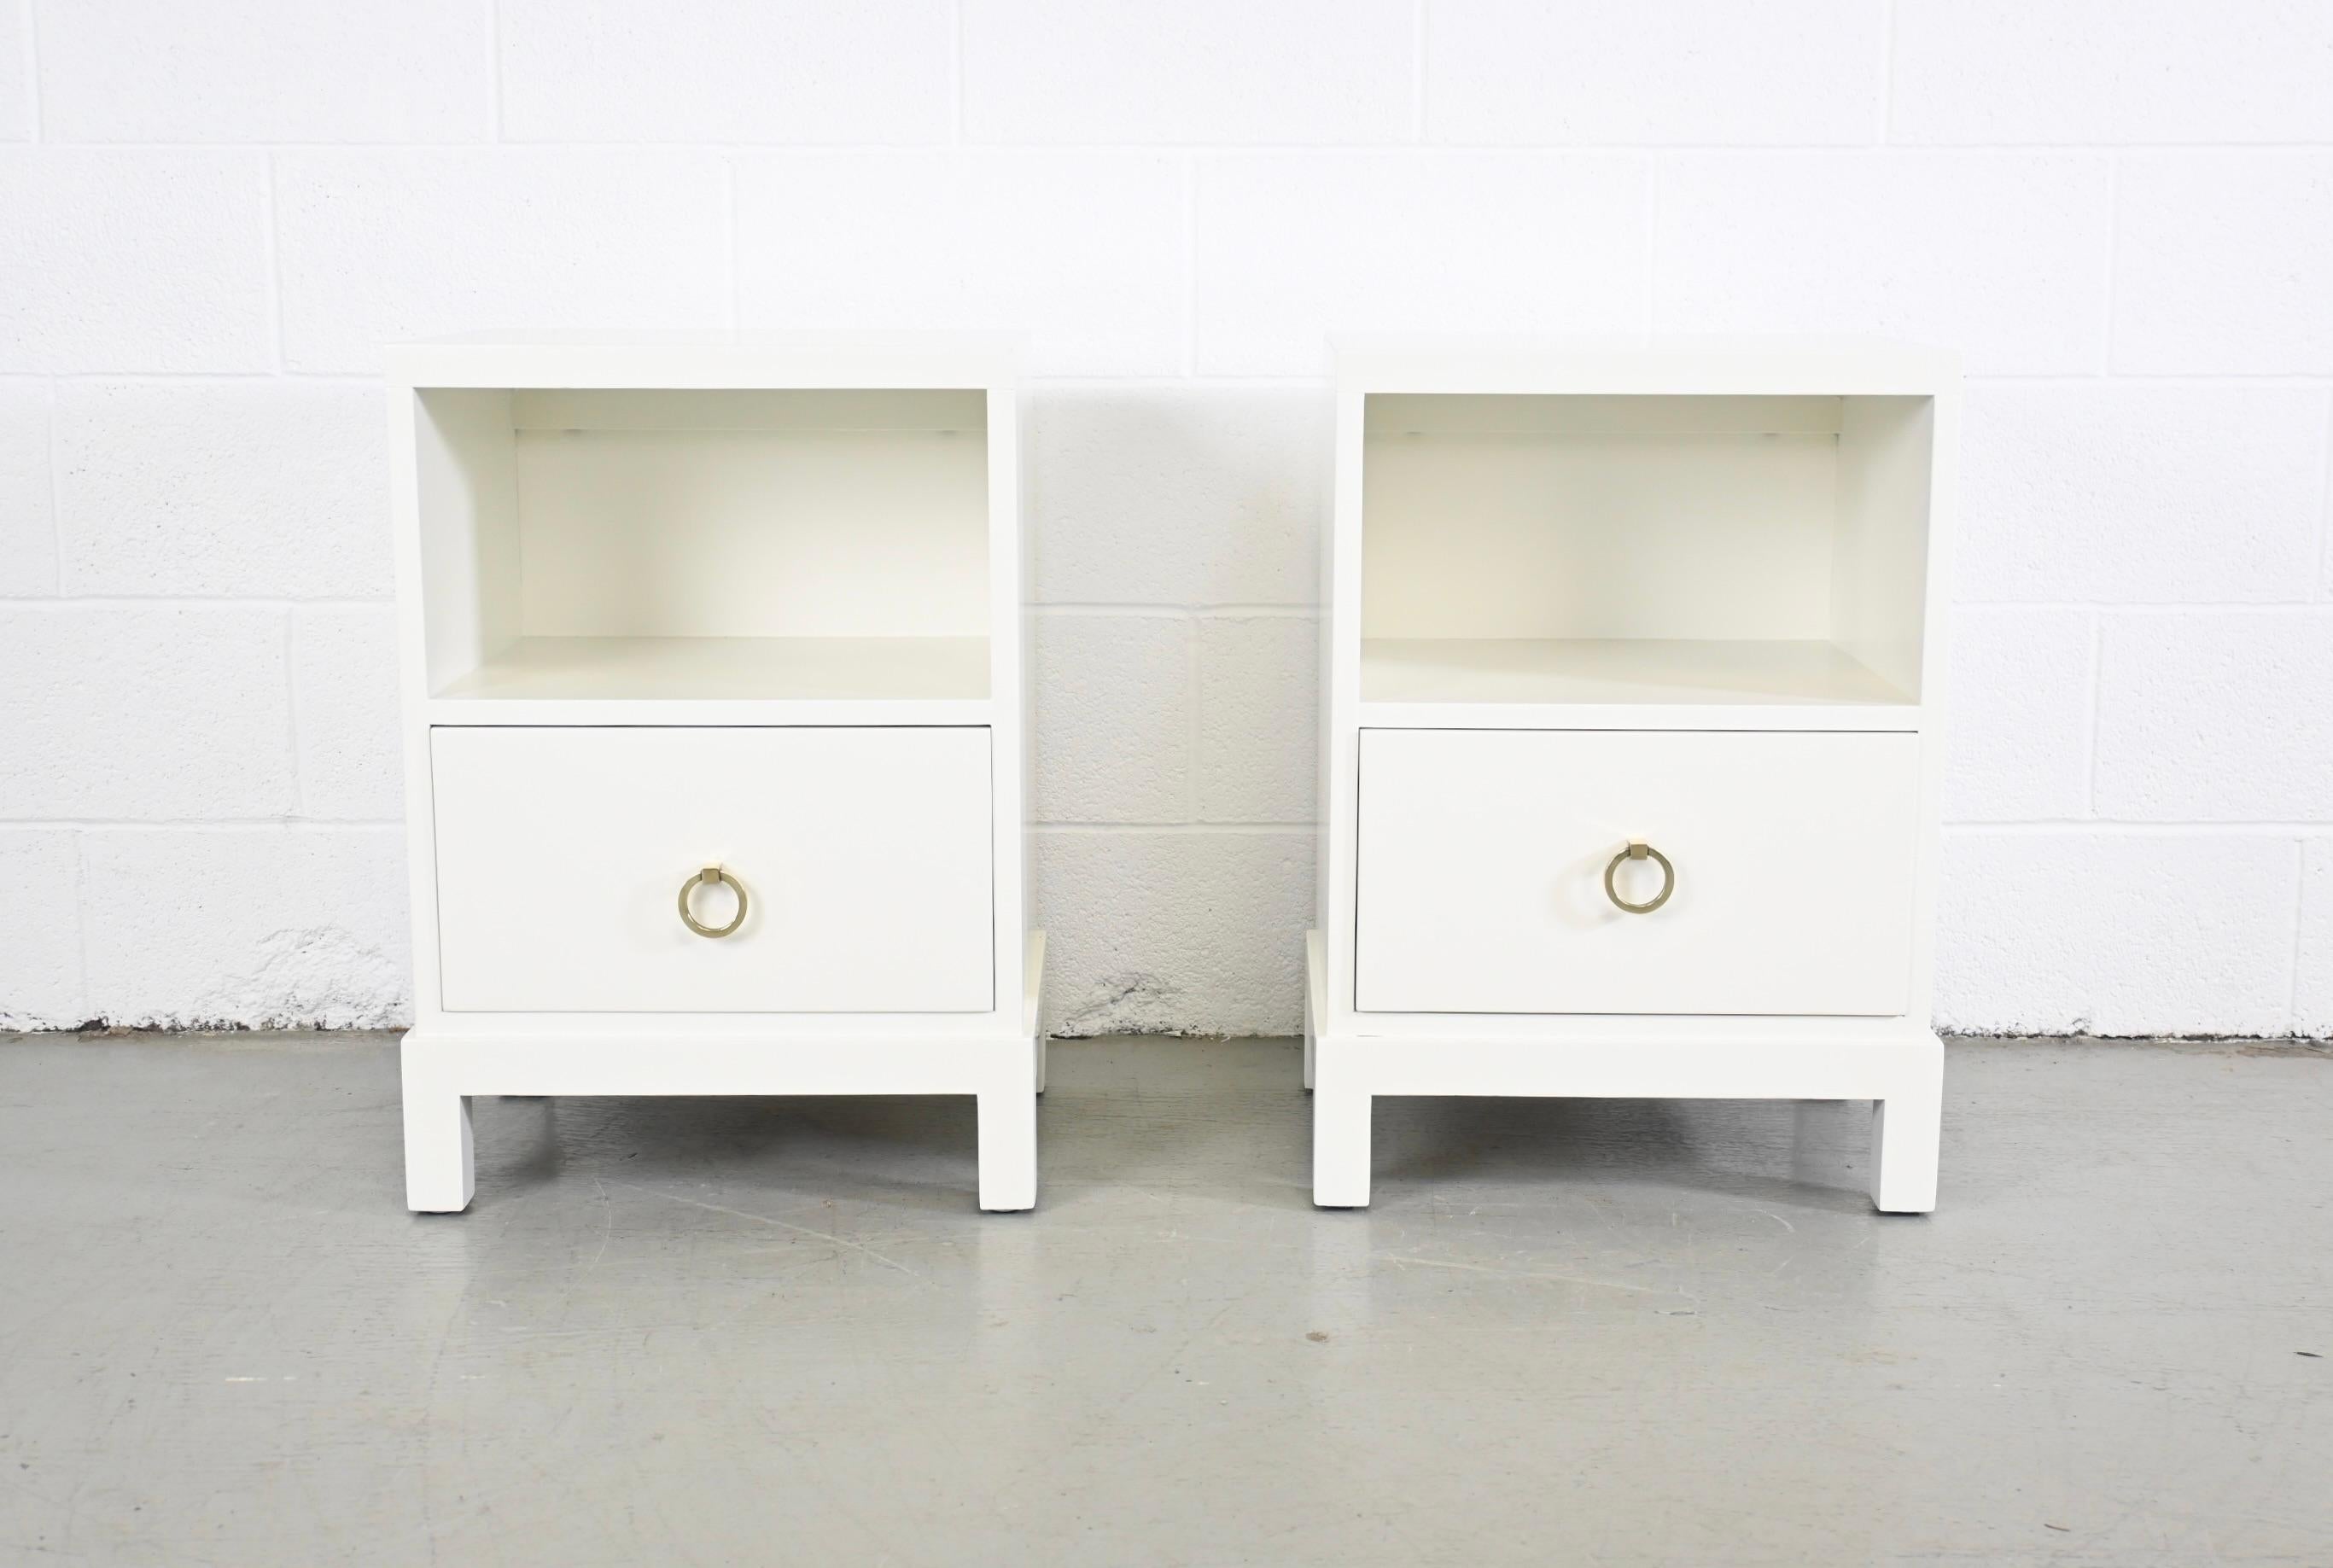 Robsjohn Gibbings for Widdicomb Mid-Century Modern white lacquered pair of nightstands

Widdicomb, USA, 1950s

Measures: 18 Wide x 14 Deep x 25.88 High. 

Pair of Mid-Century Modern Hollywood regency style white lacquered nightstands with